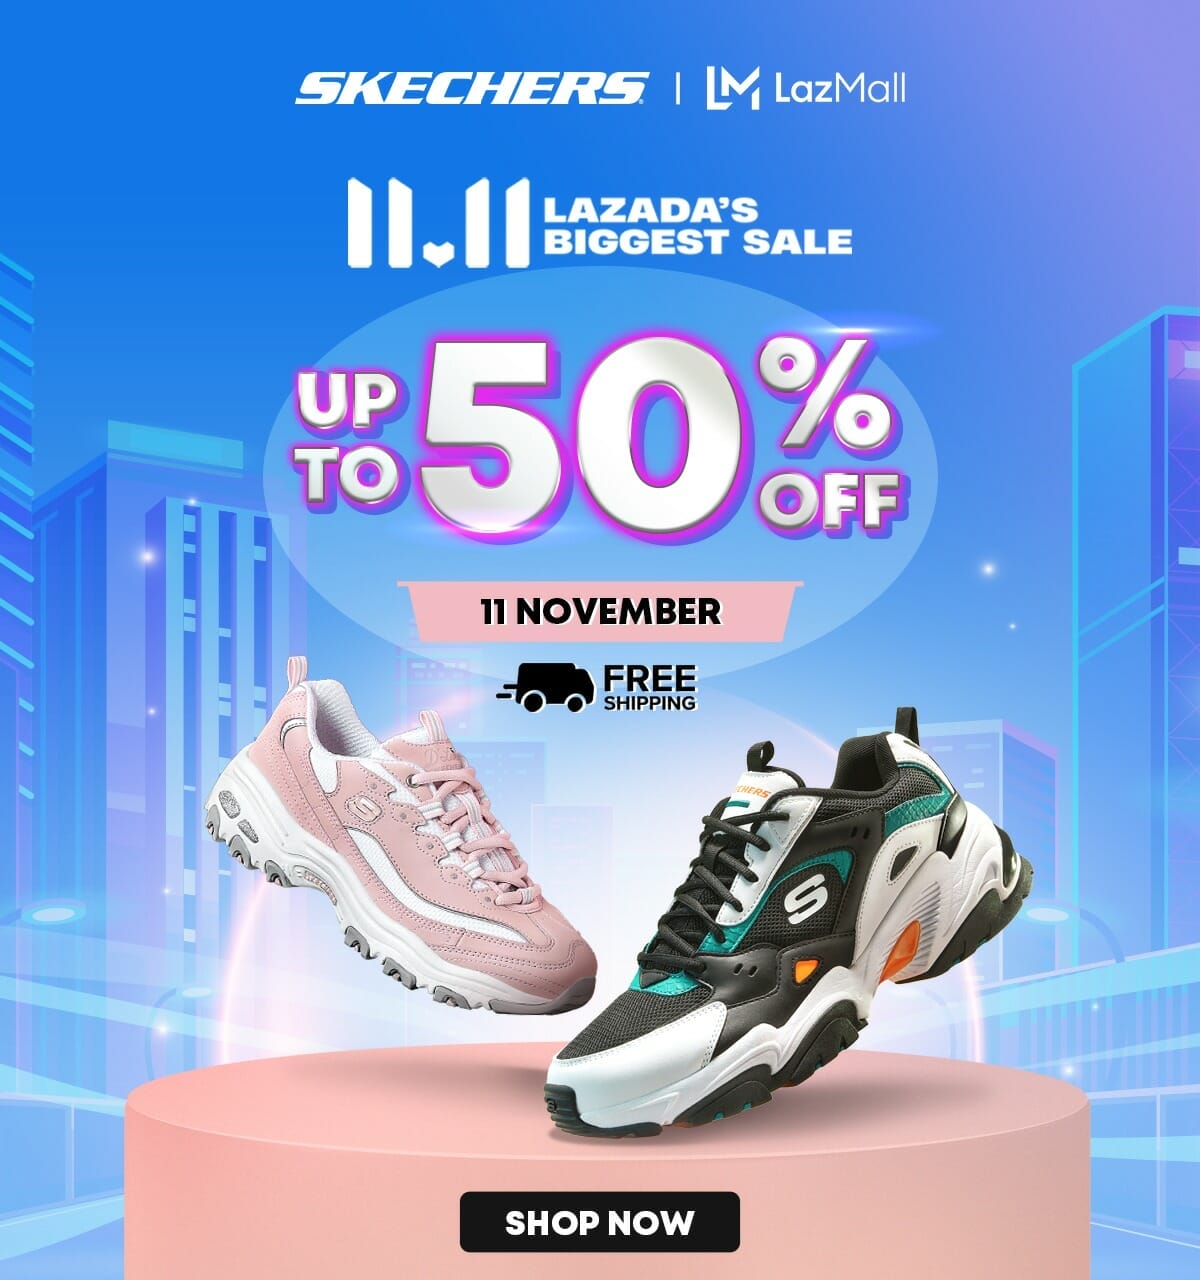 Skechers Lazada 11.11 Sale: Up To 50% Off